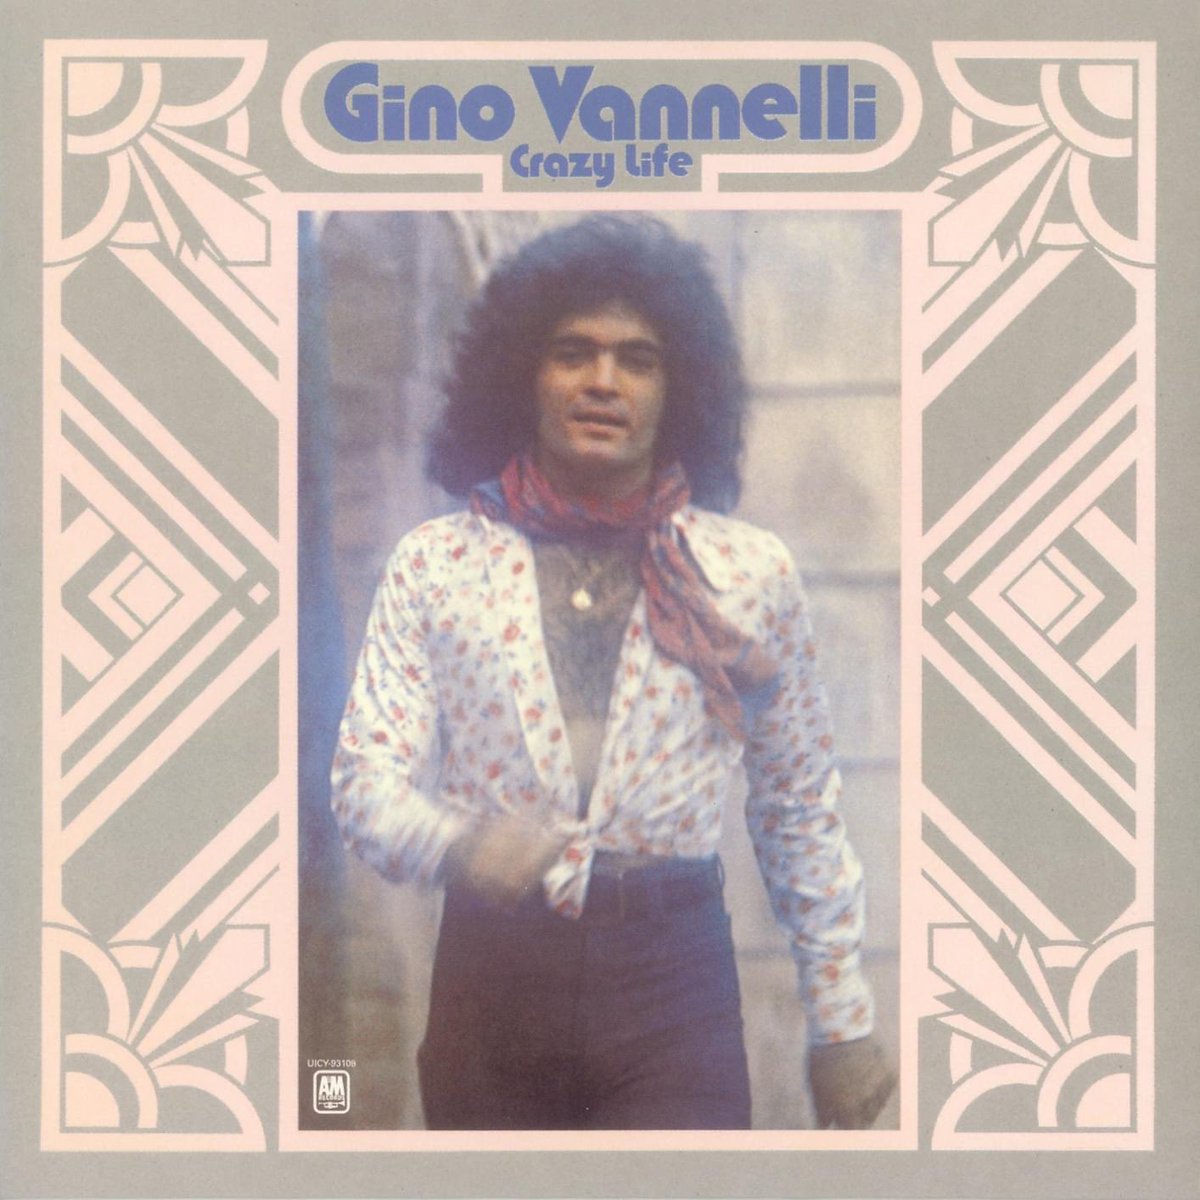 IMC Pick of the Day: 'There's No Time', by Gino Vannelli, from the album 'Crazy Life', 1973. This great track is as smooth as it gets for a Gino track. Enjoy 'There's No Time' from Gino Vannelli's debut album ' Crazy Life' youtu.be/TAw7UHijPCk